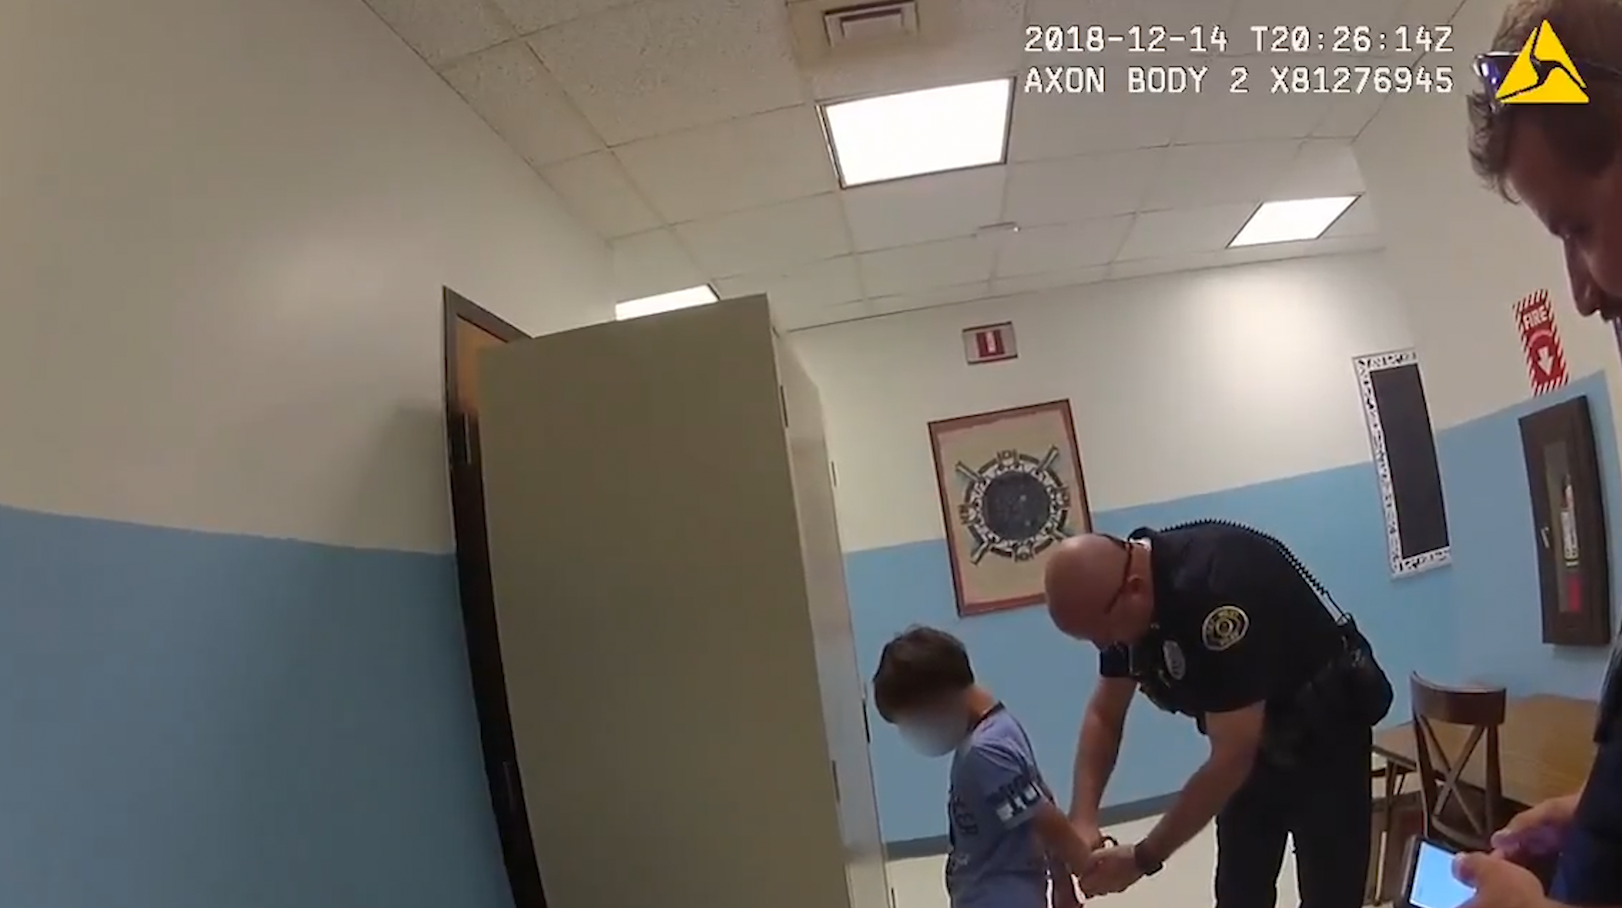 Xx 12yars Hd Video - Body-cam video shows 8-year-old Florida boy with disabilities being  arrested - The Washington Post